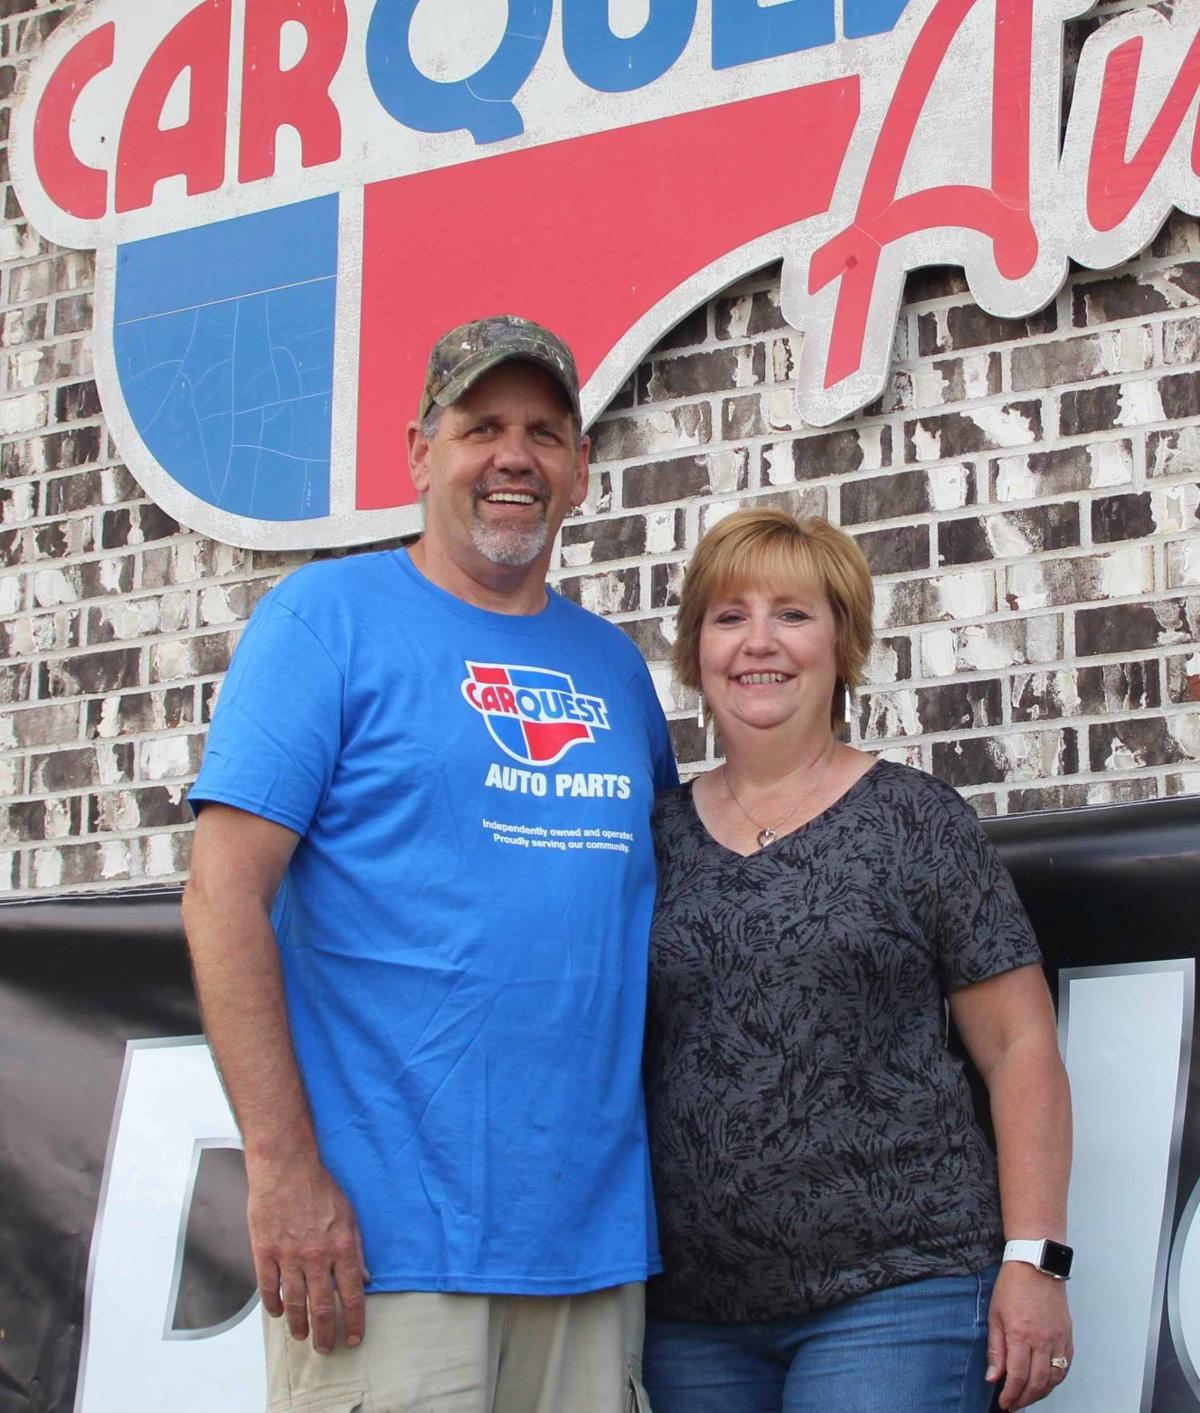 New Owners Take Over Reedsburg Carquest Navigate Through Covid 19 Pandemic Area Business Wiscnews Com